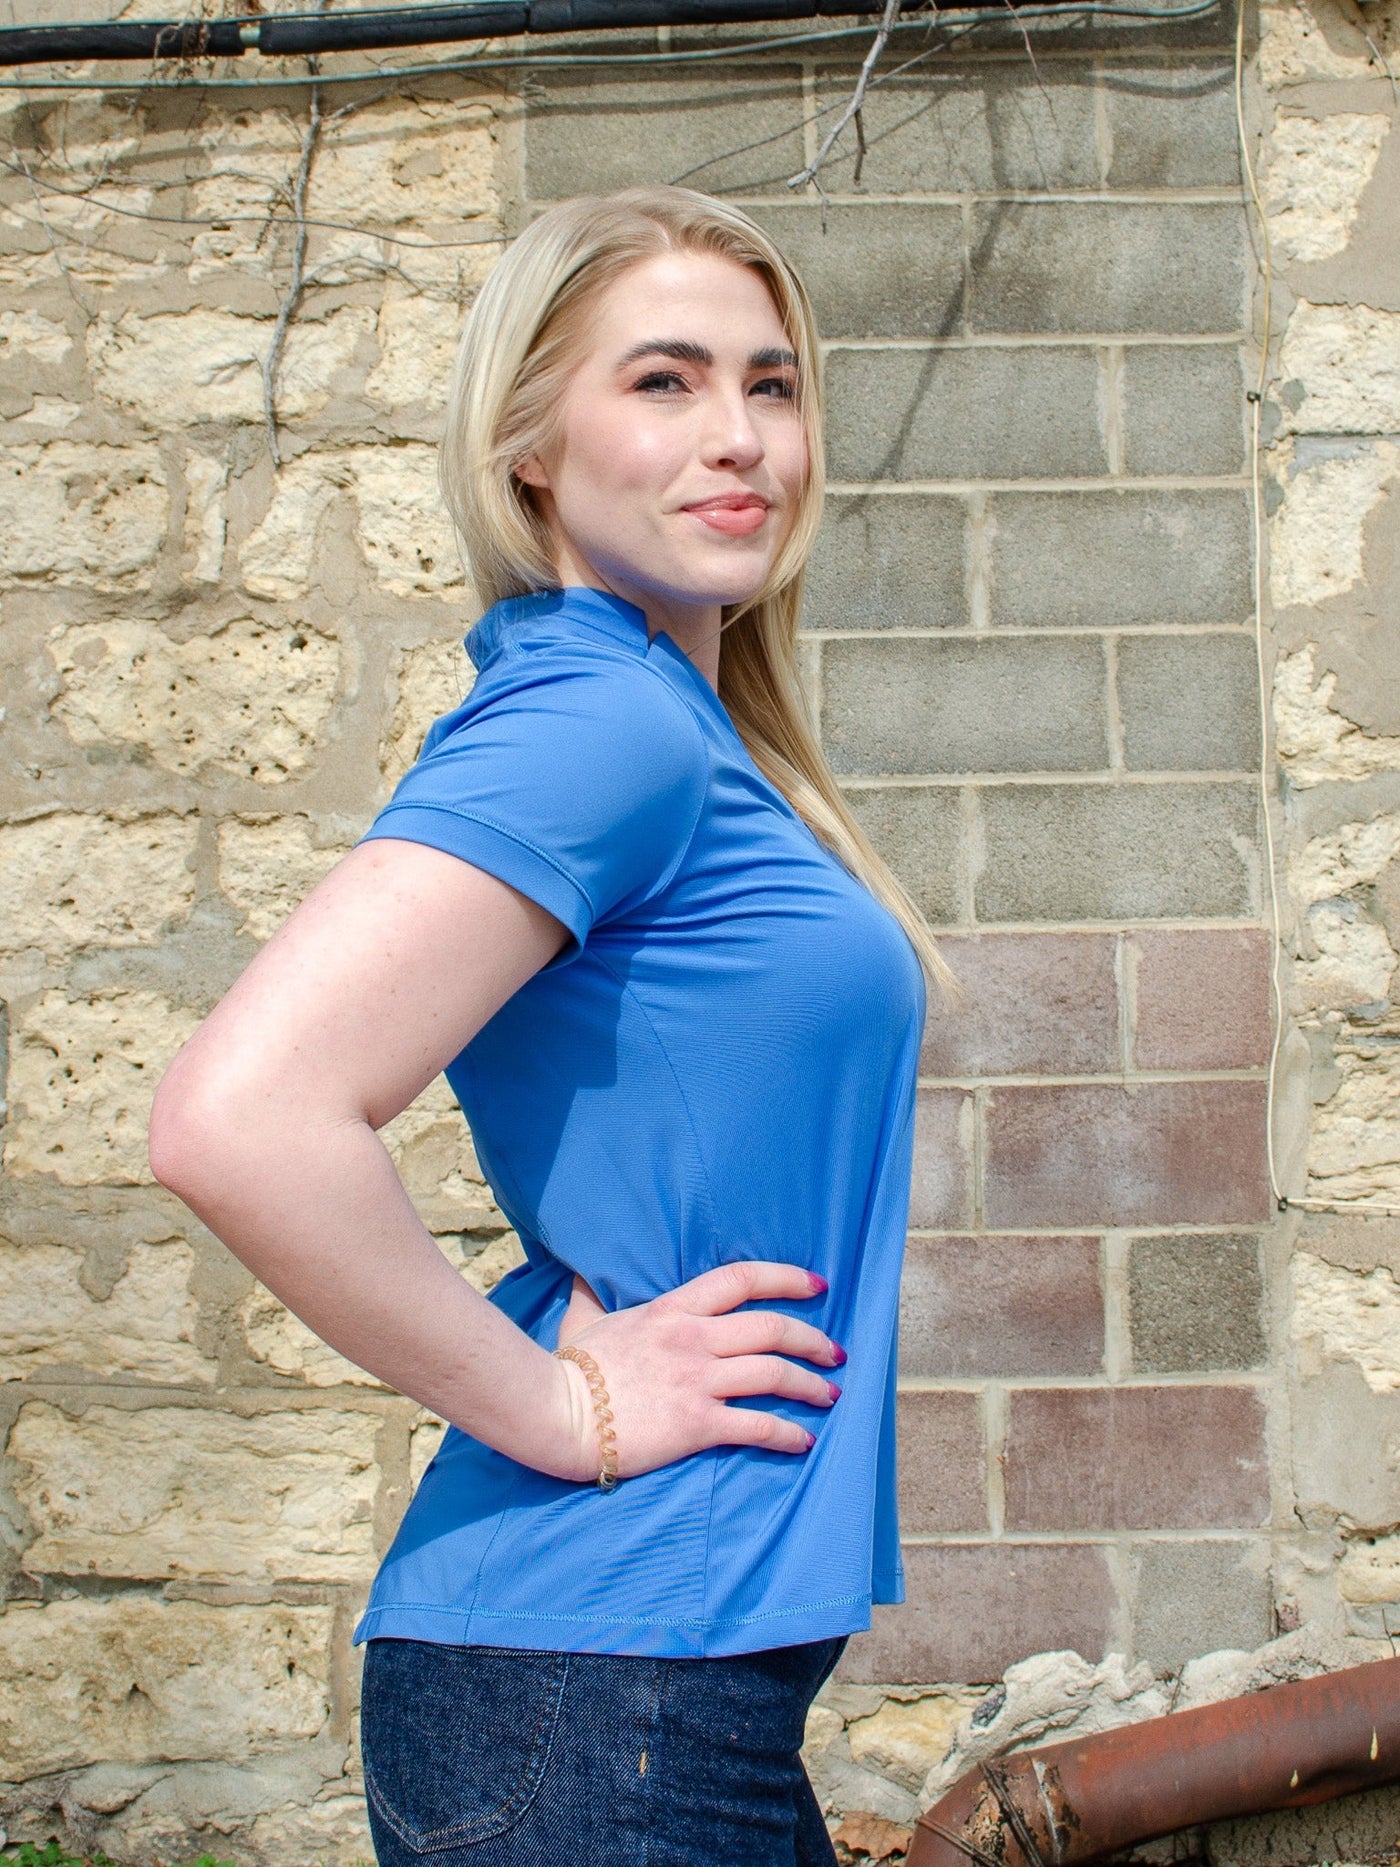 Model is wearing a blue collared athletic short sleeve t-shirt. T-shirt worn with jeans.